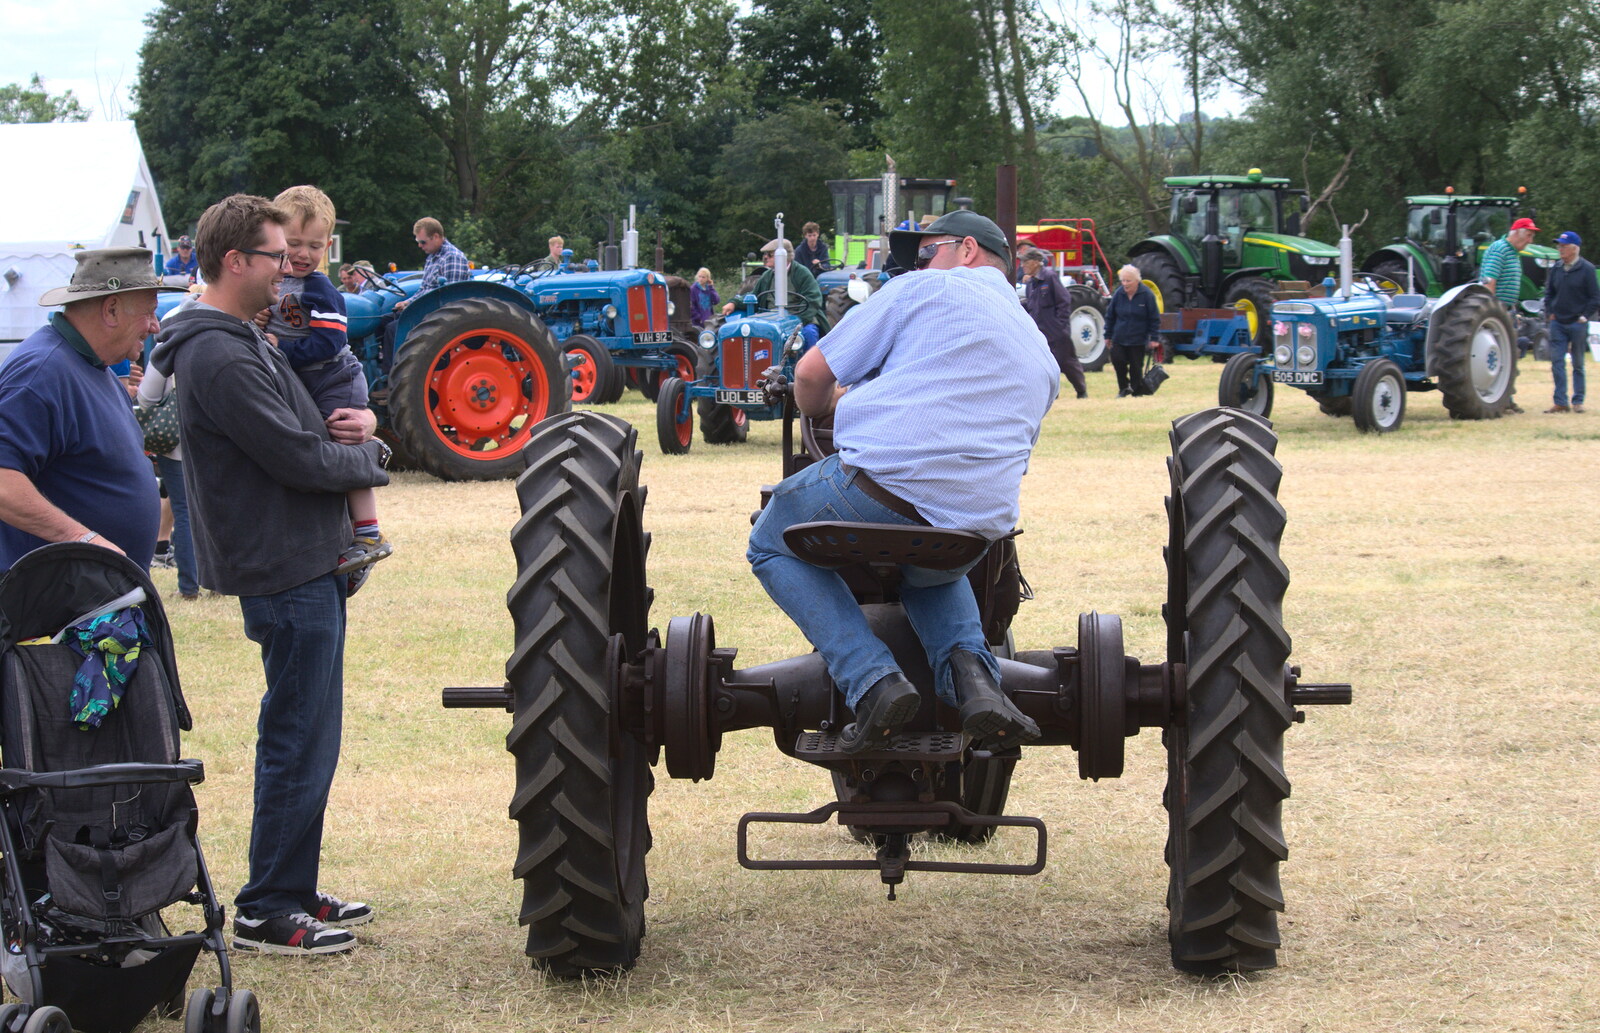 A tractor which seems to be all wheels from A Vintage Tractorey Sort of Day, Palgrave, Suffolk - 21st June 2015